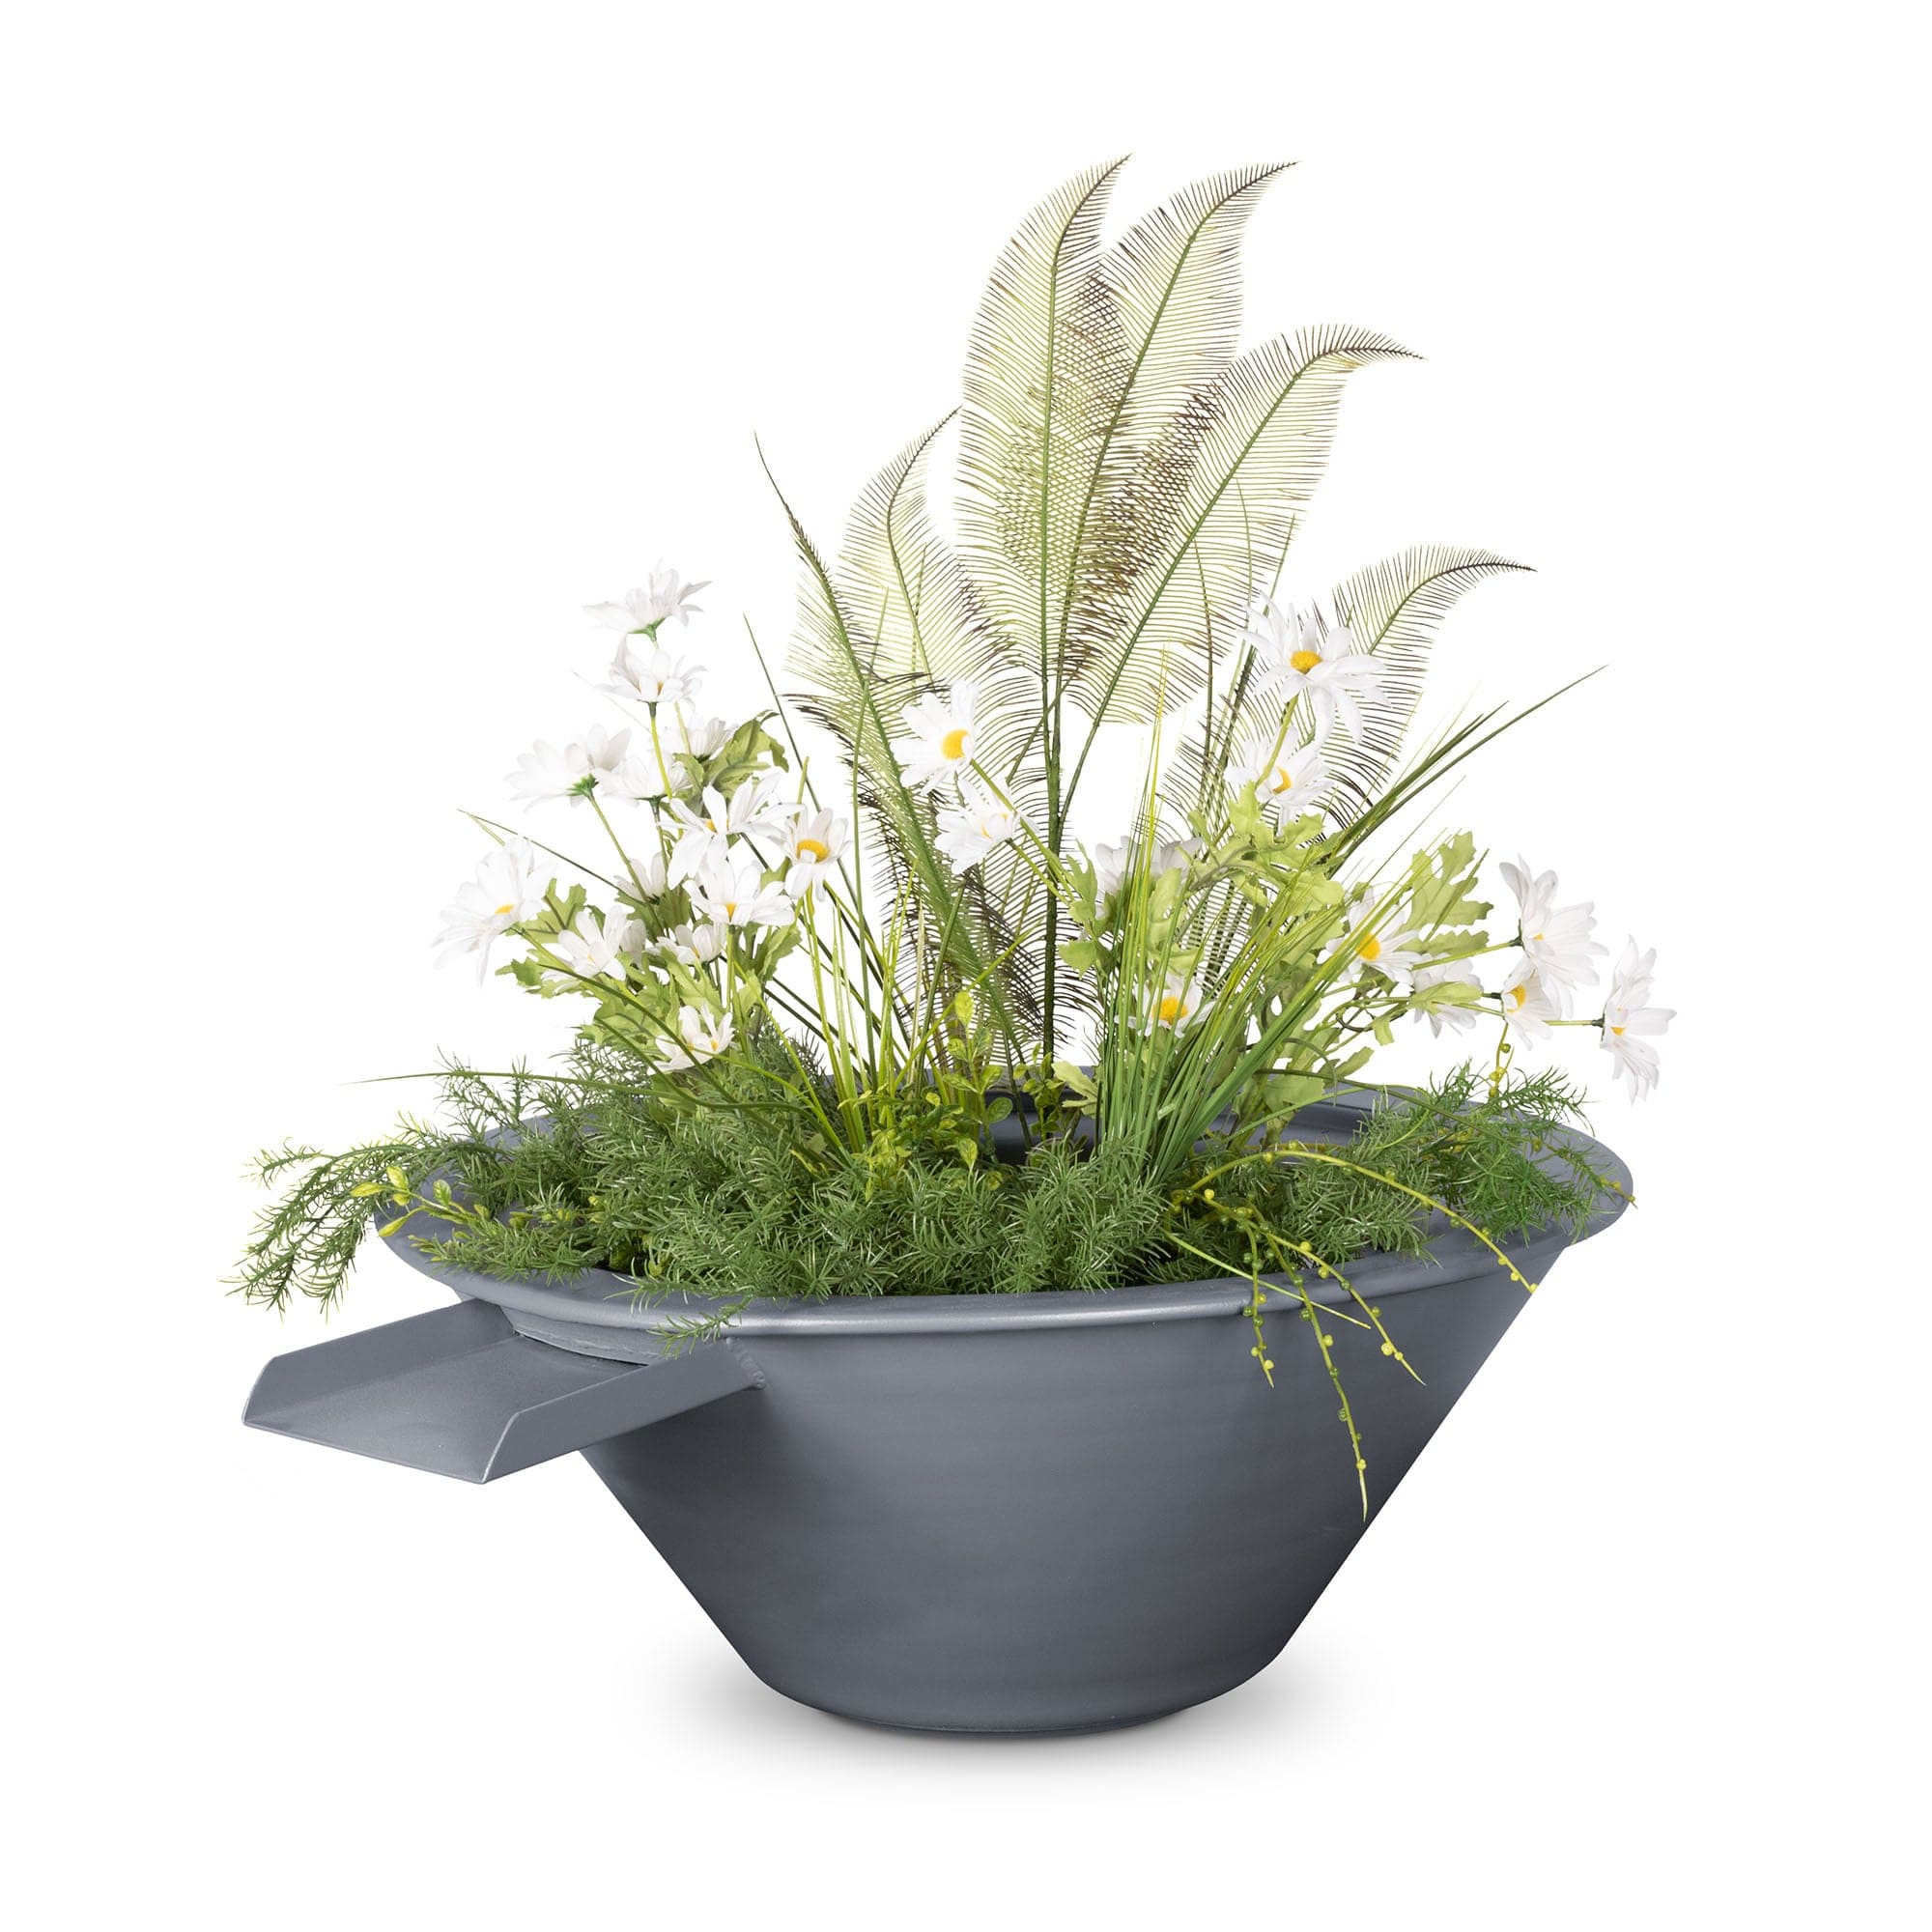 The Outdoor Plus Planter & Water Bowl 24